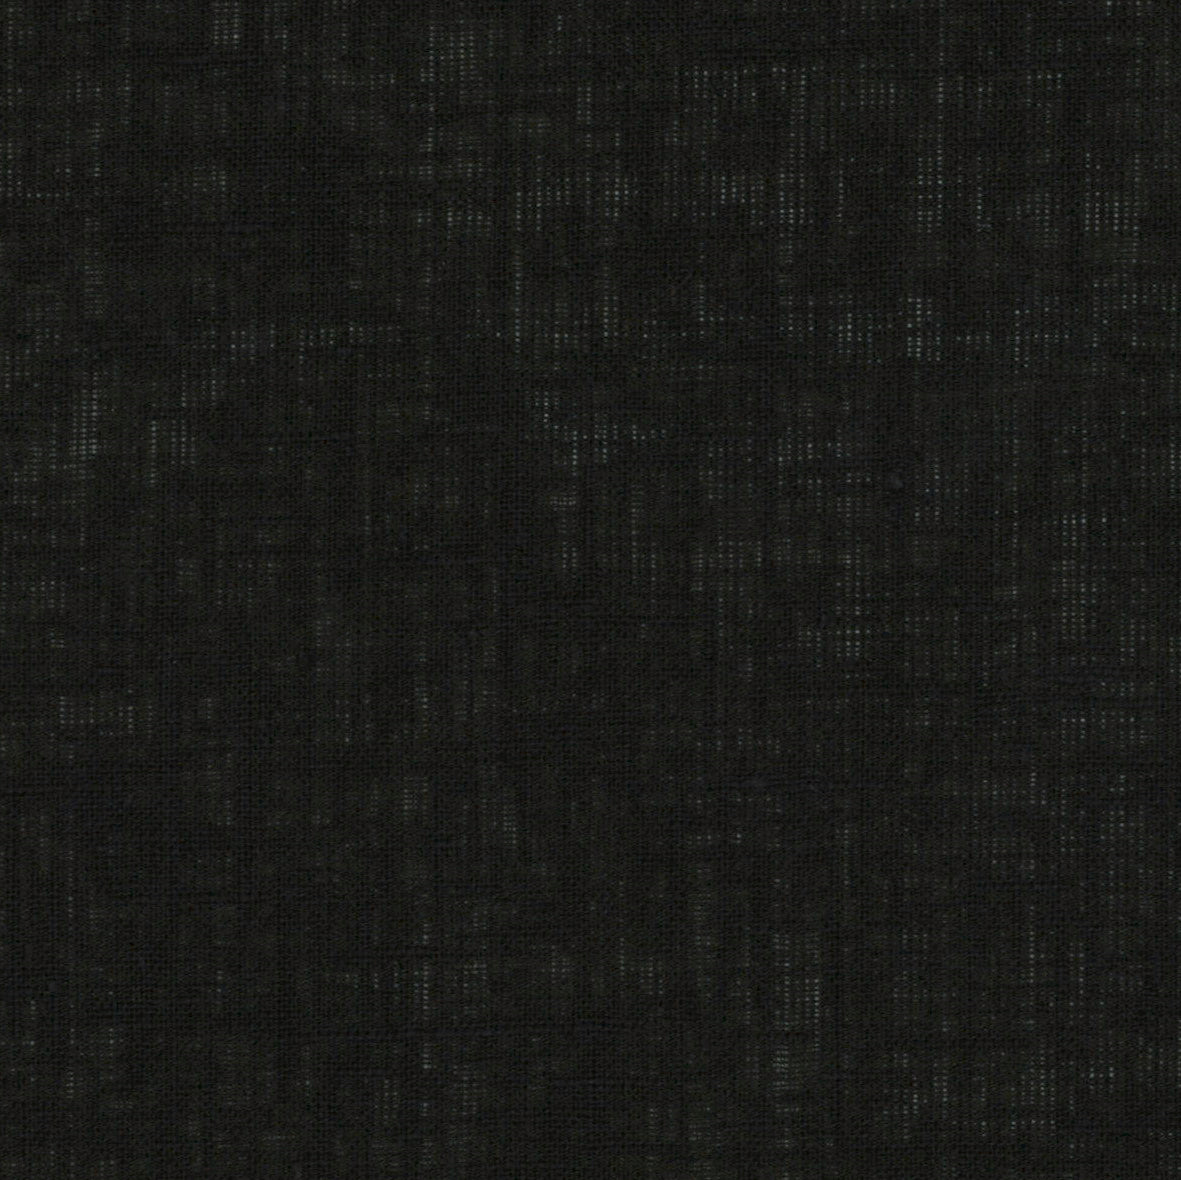 36011-02 Dark Olive Linen Plain Dyed Blend 180g.yd 53&quot; blend green linen plain dyed polyester woven Solid Color - knit fabric - woven fabric - fabric company - fabric wholesale - fabric b2b - fabric factory - high quality fabric - hong kong fabric - fabric hk - acetate fabric - cotton fabric - linen fabric - metallic fabric - nylon fabric - polyester fabric - spandex fabric - chun wing hing - cwh hk - fabric worldwide ship - 針織布 - 梳織布 - 布料公司- 布料批發 - 香港布料 - 秦榮興